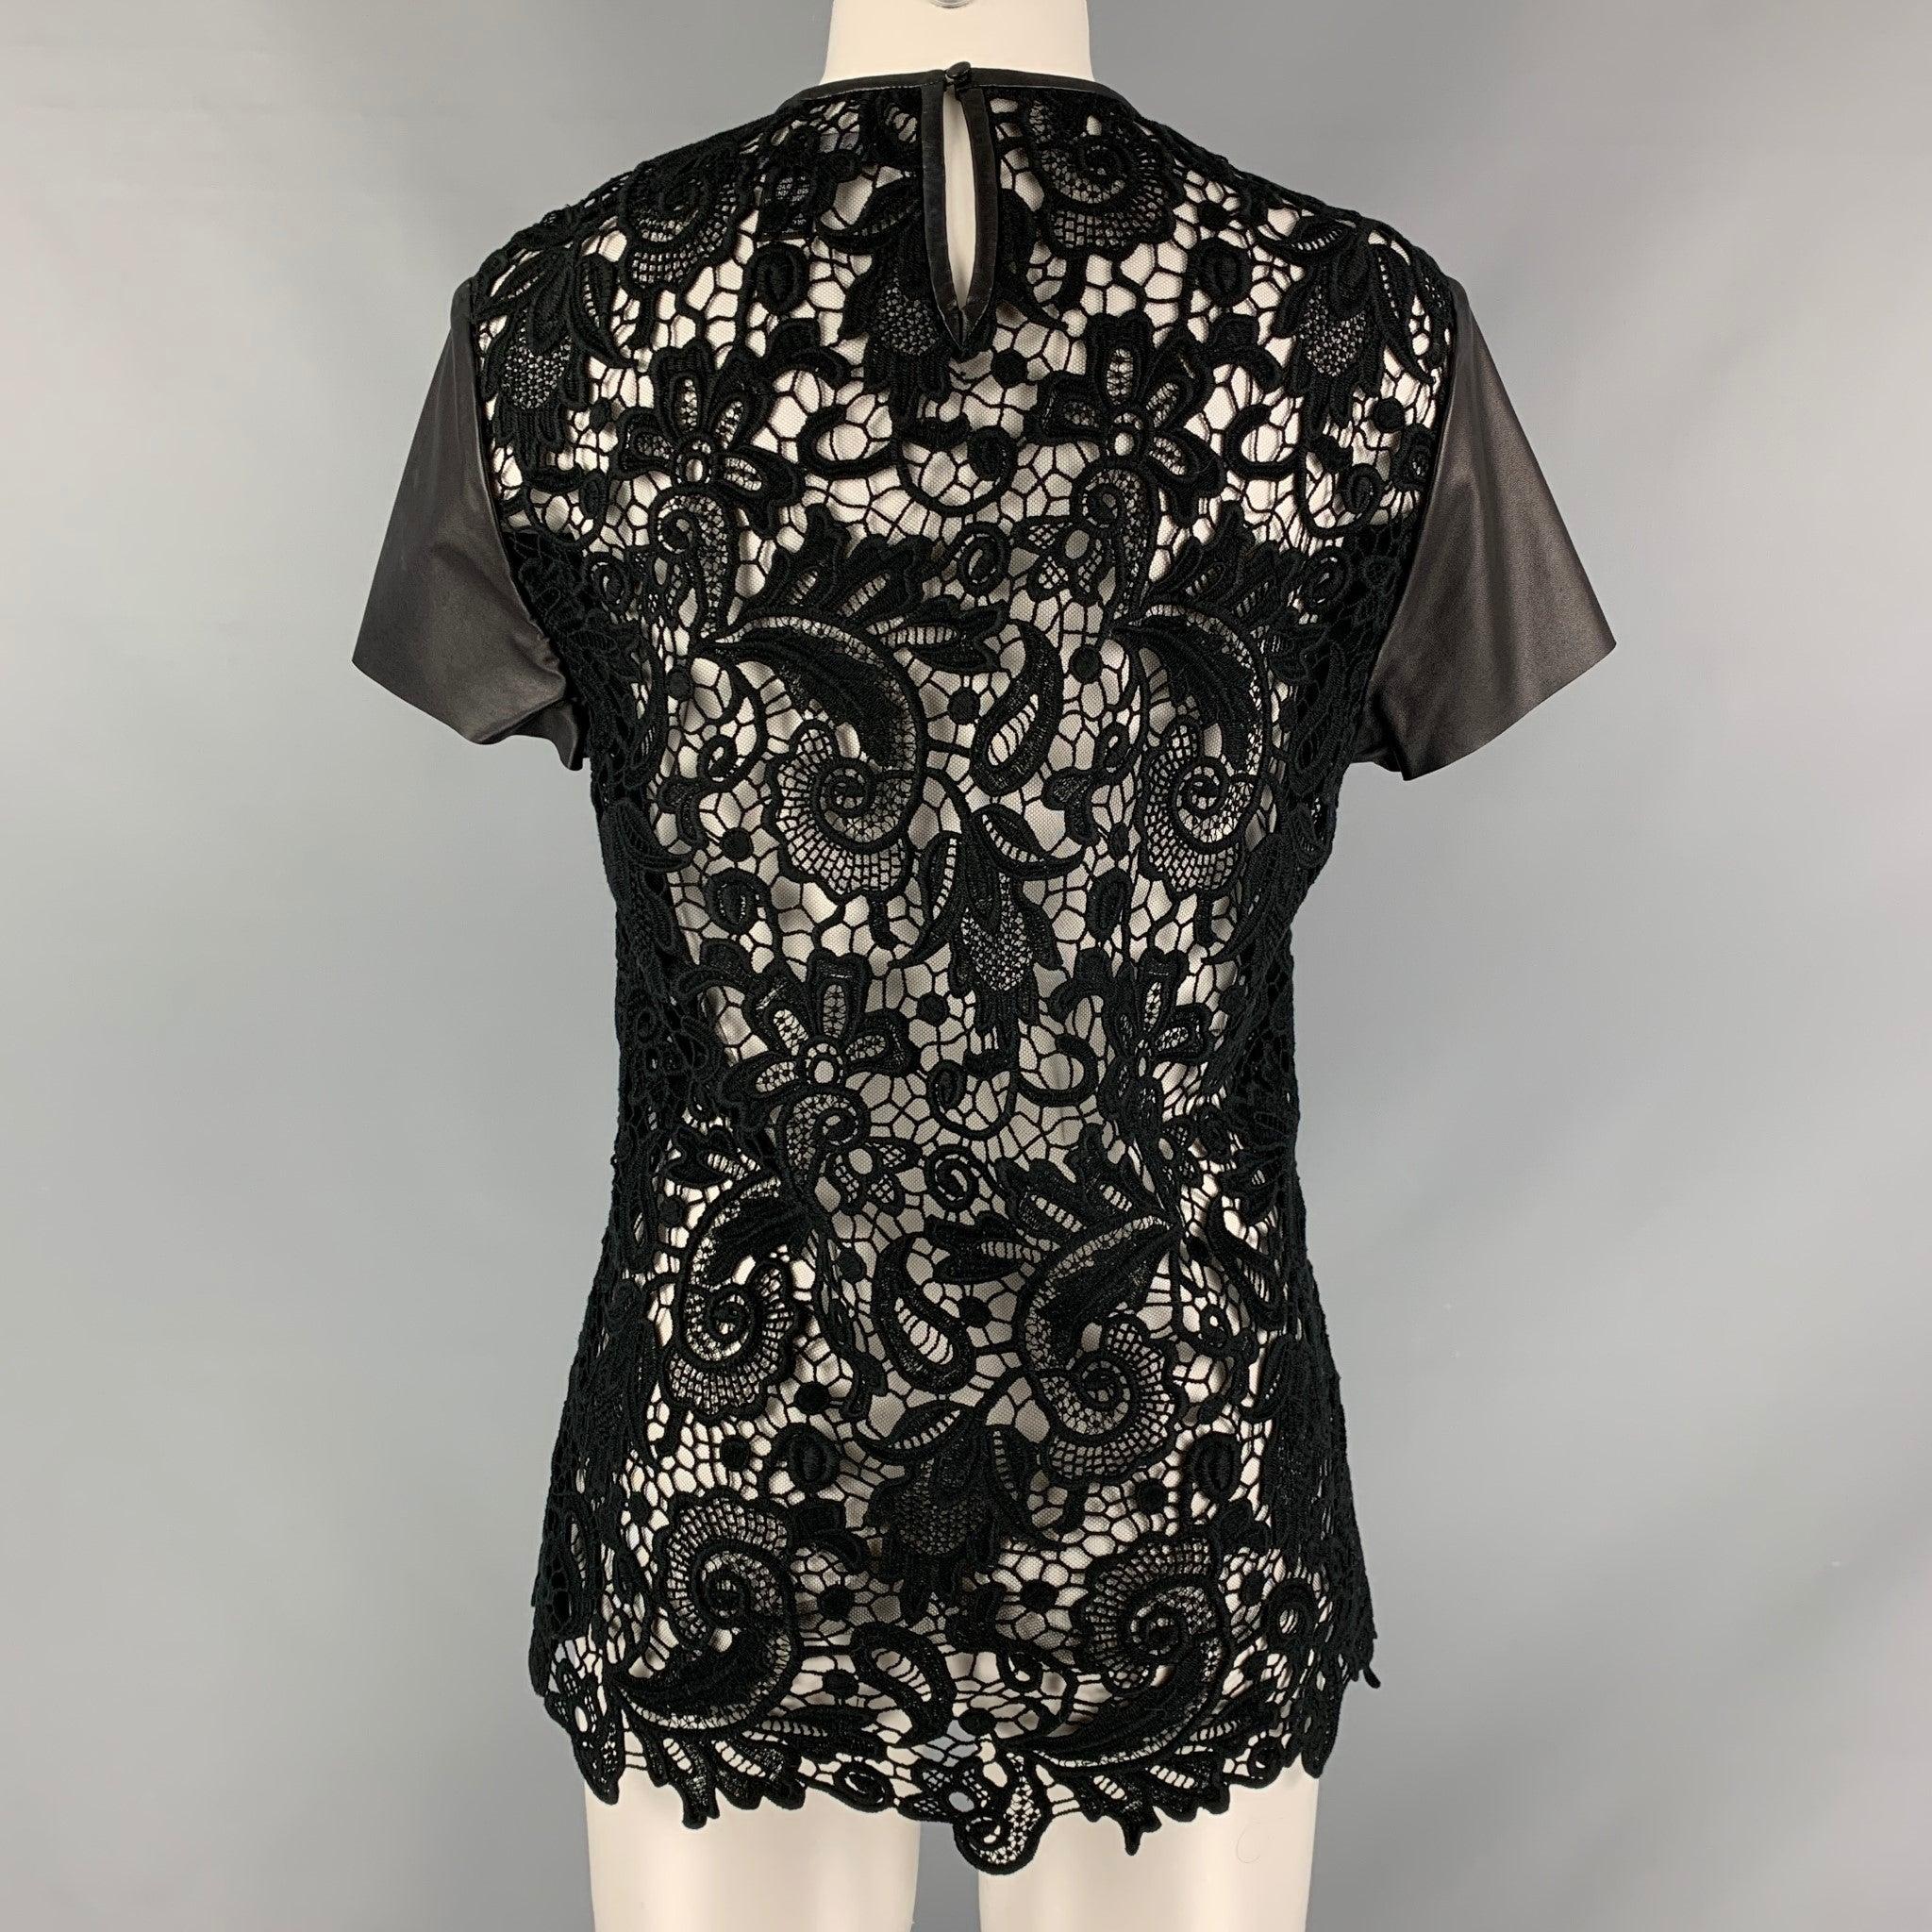 RALPH LAUREN Size 10 Black Guipure  Cotton Leather Trim Short Sleeve Dress Top In Excellent Condition For Sale In San Francisco, CA